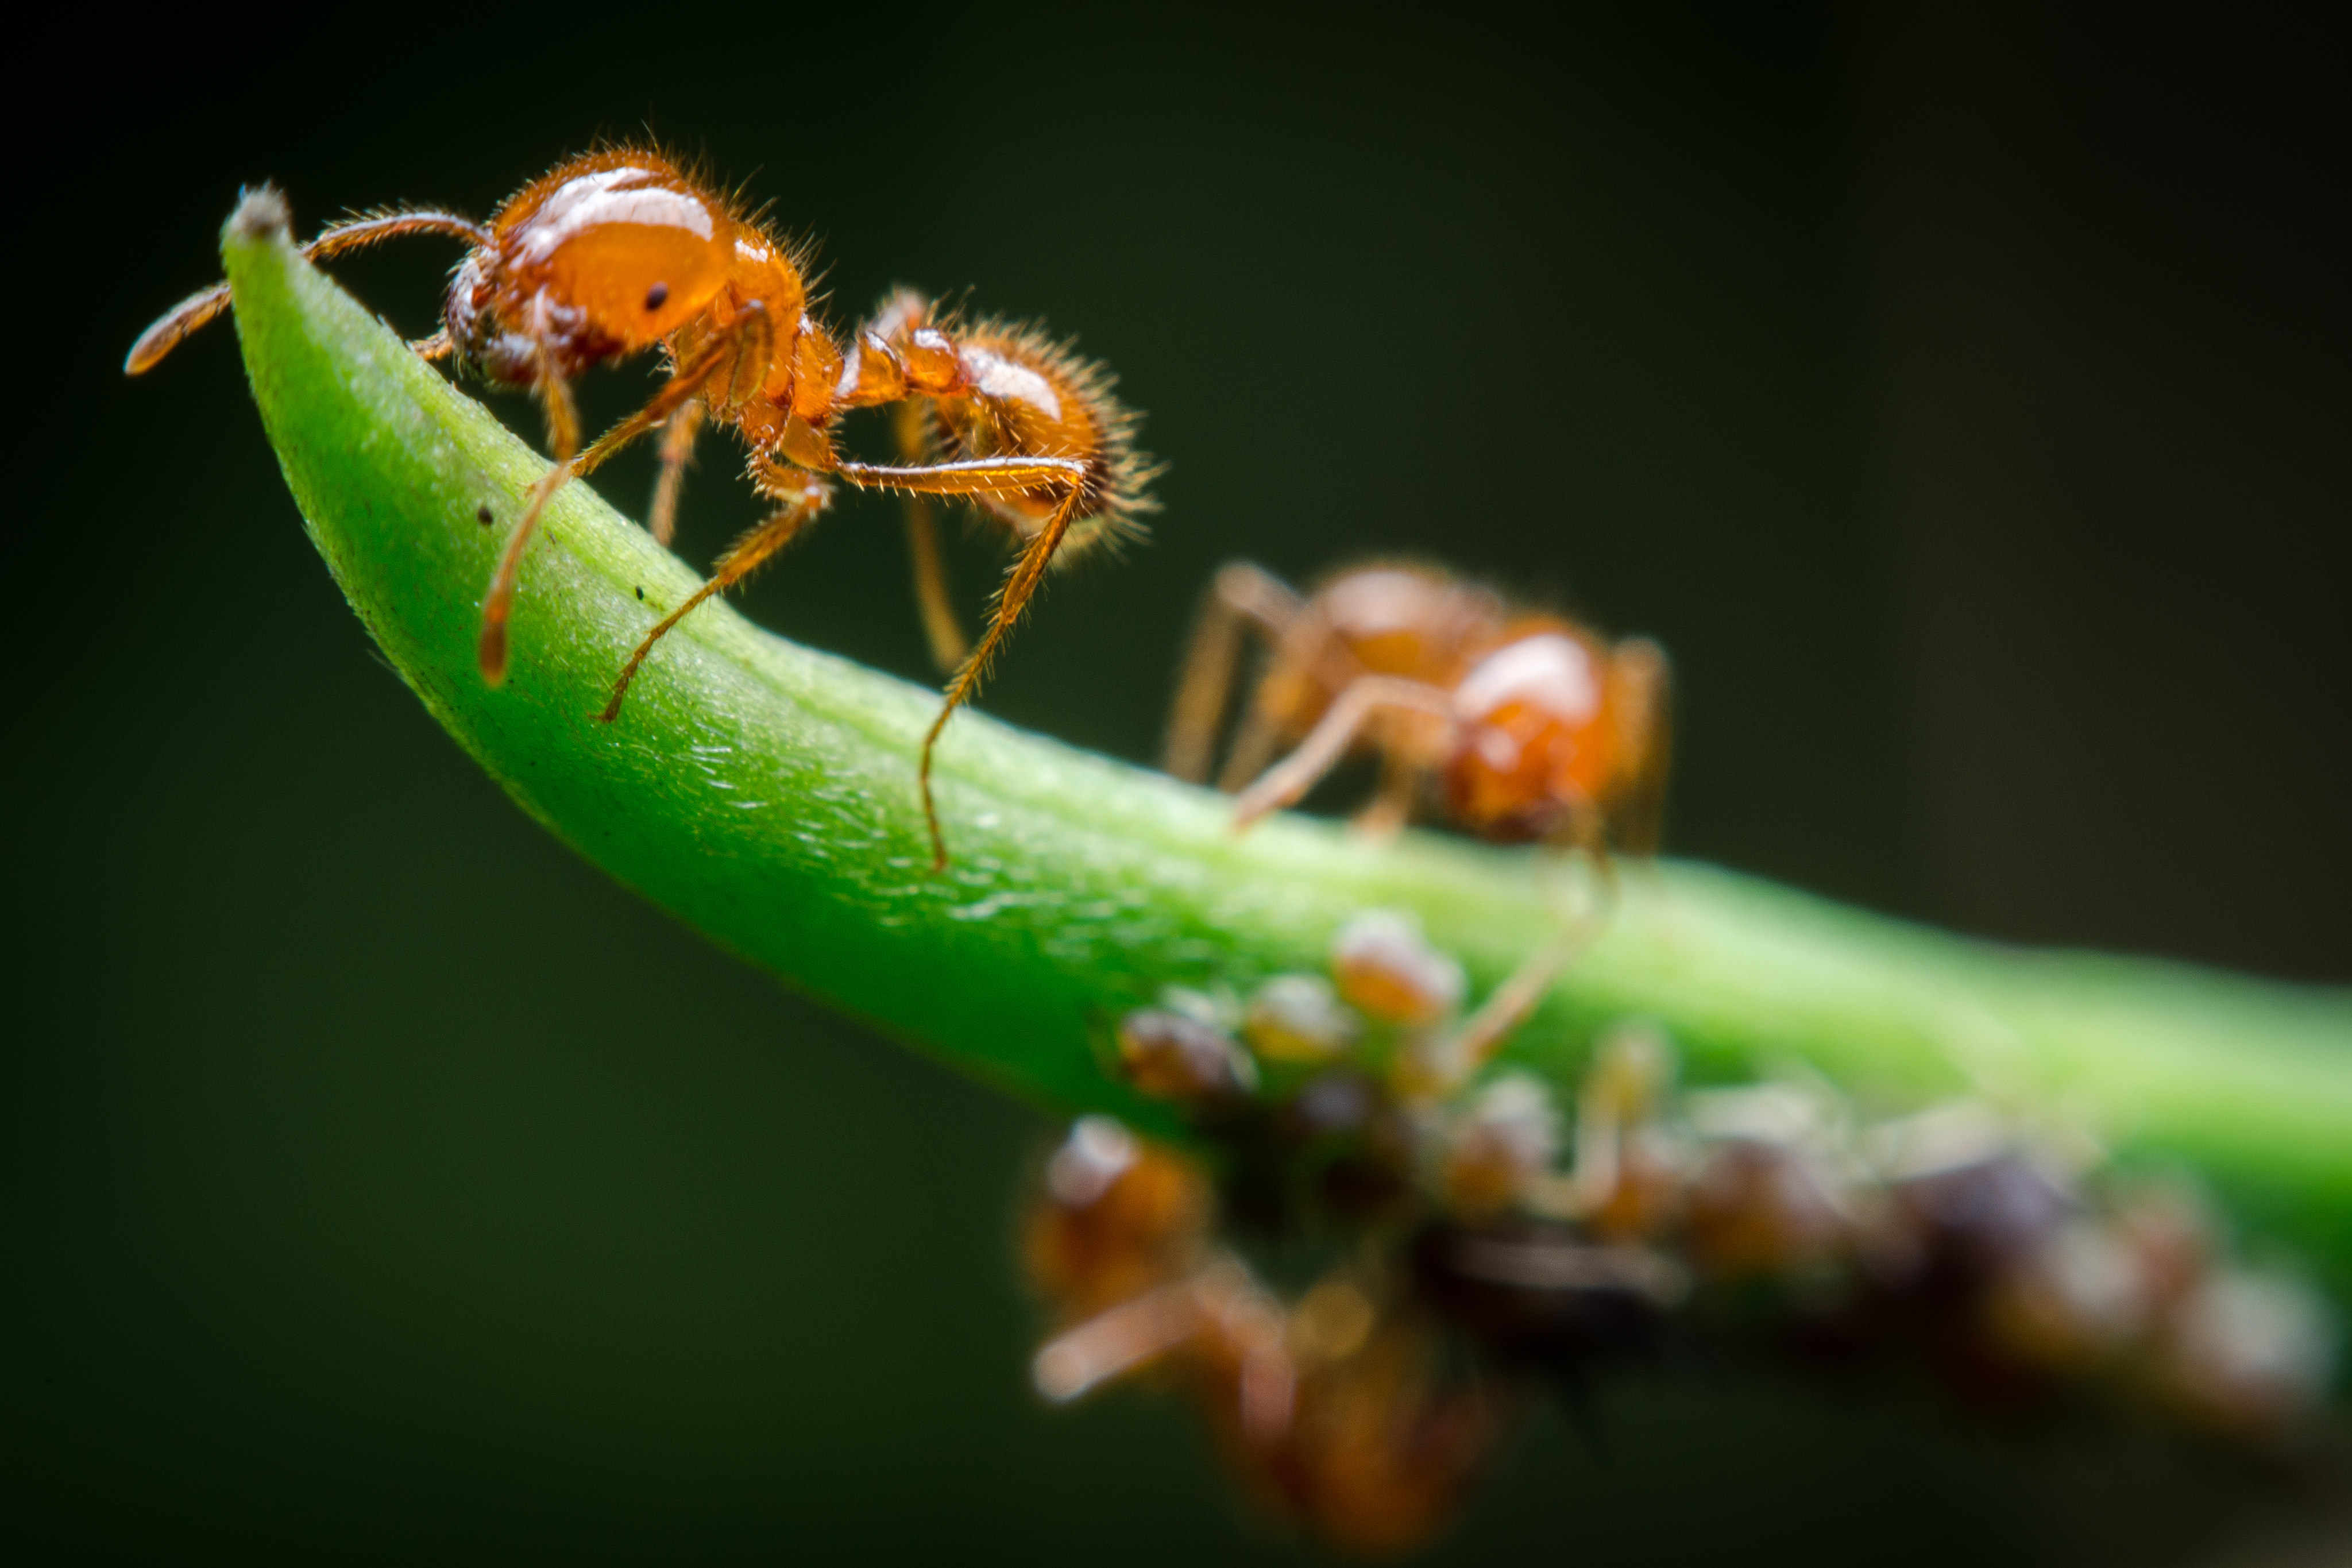 Red imported fire ants are among the invasive species that authorities are seeking to keep out of China. Photo: Shutterstock